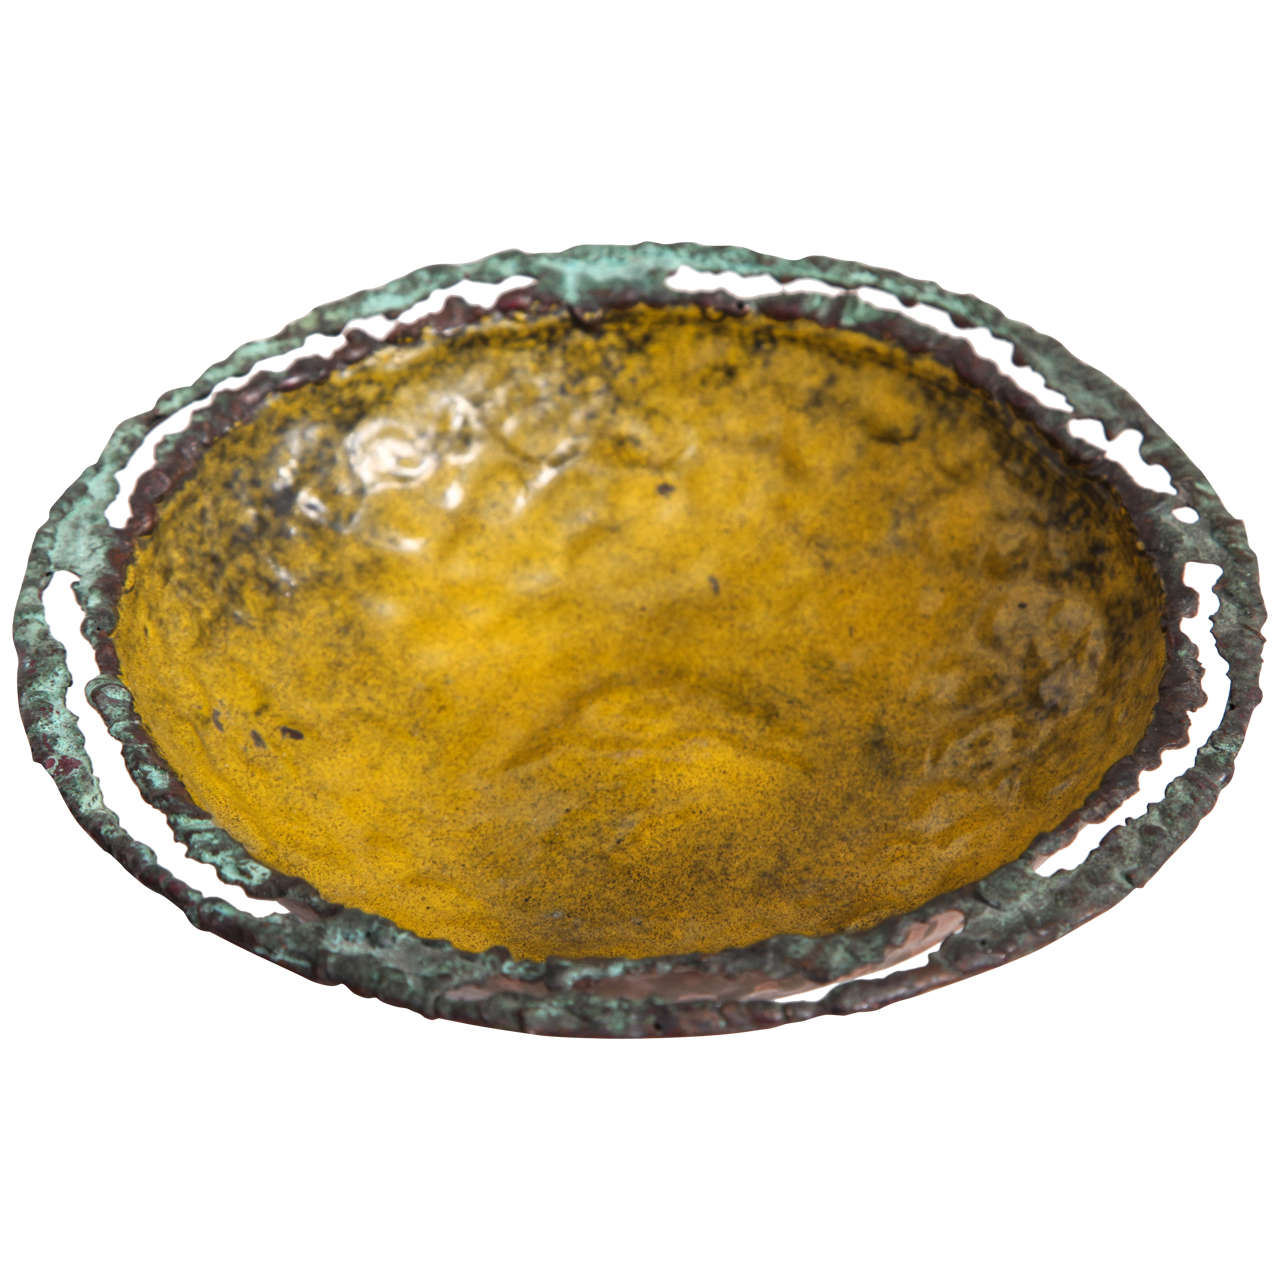 Marcello Fantoni
Hand-wrought copper bowl with a torch cut rim and yellow enameled interior.
Marked Fantoni Firenze Raymor, Italy
Italian, circa 1960.